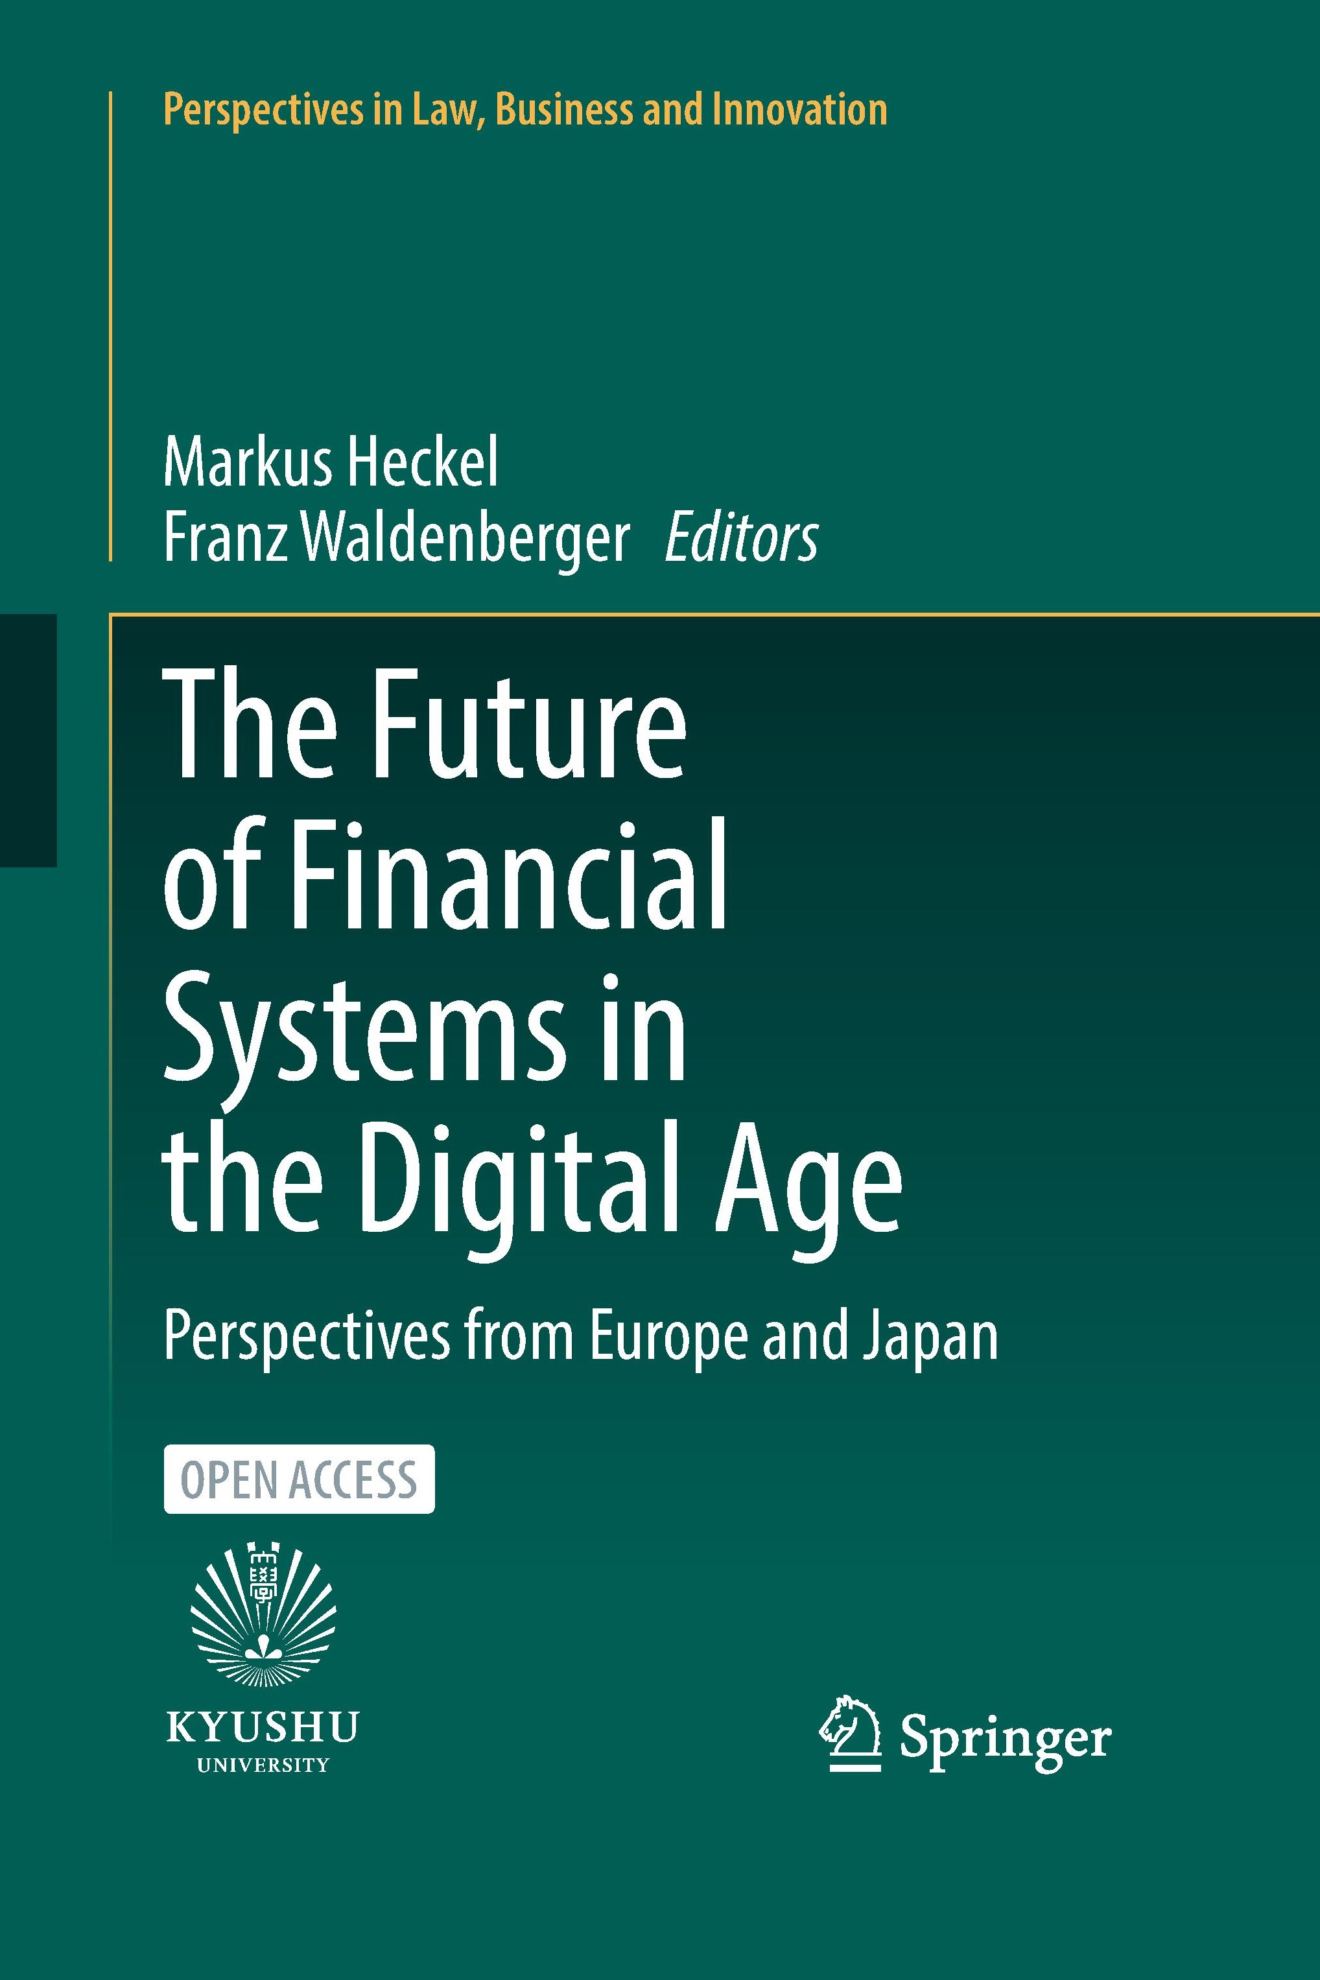 2022 fw mh Cover future of financial systems in digital age front only